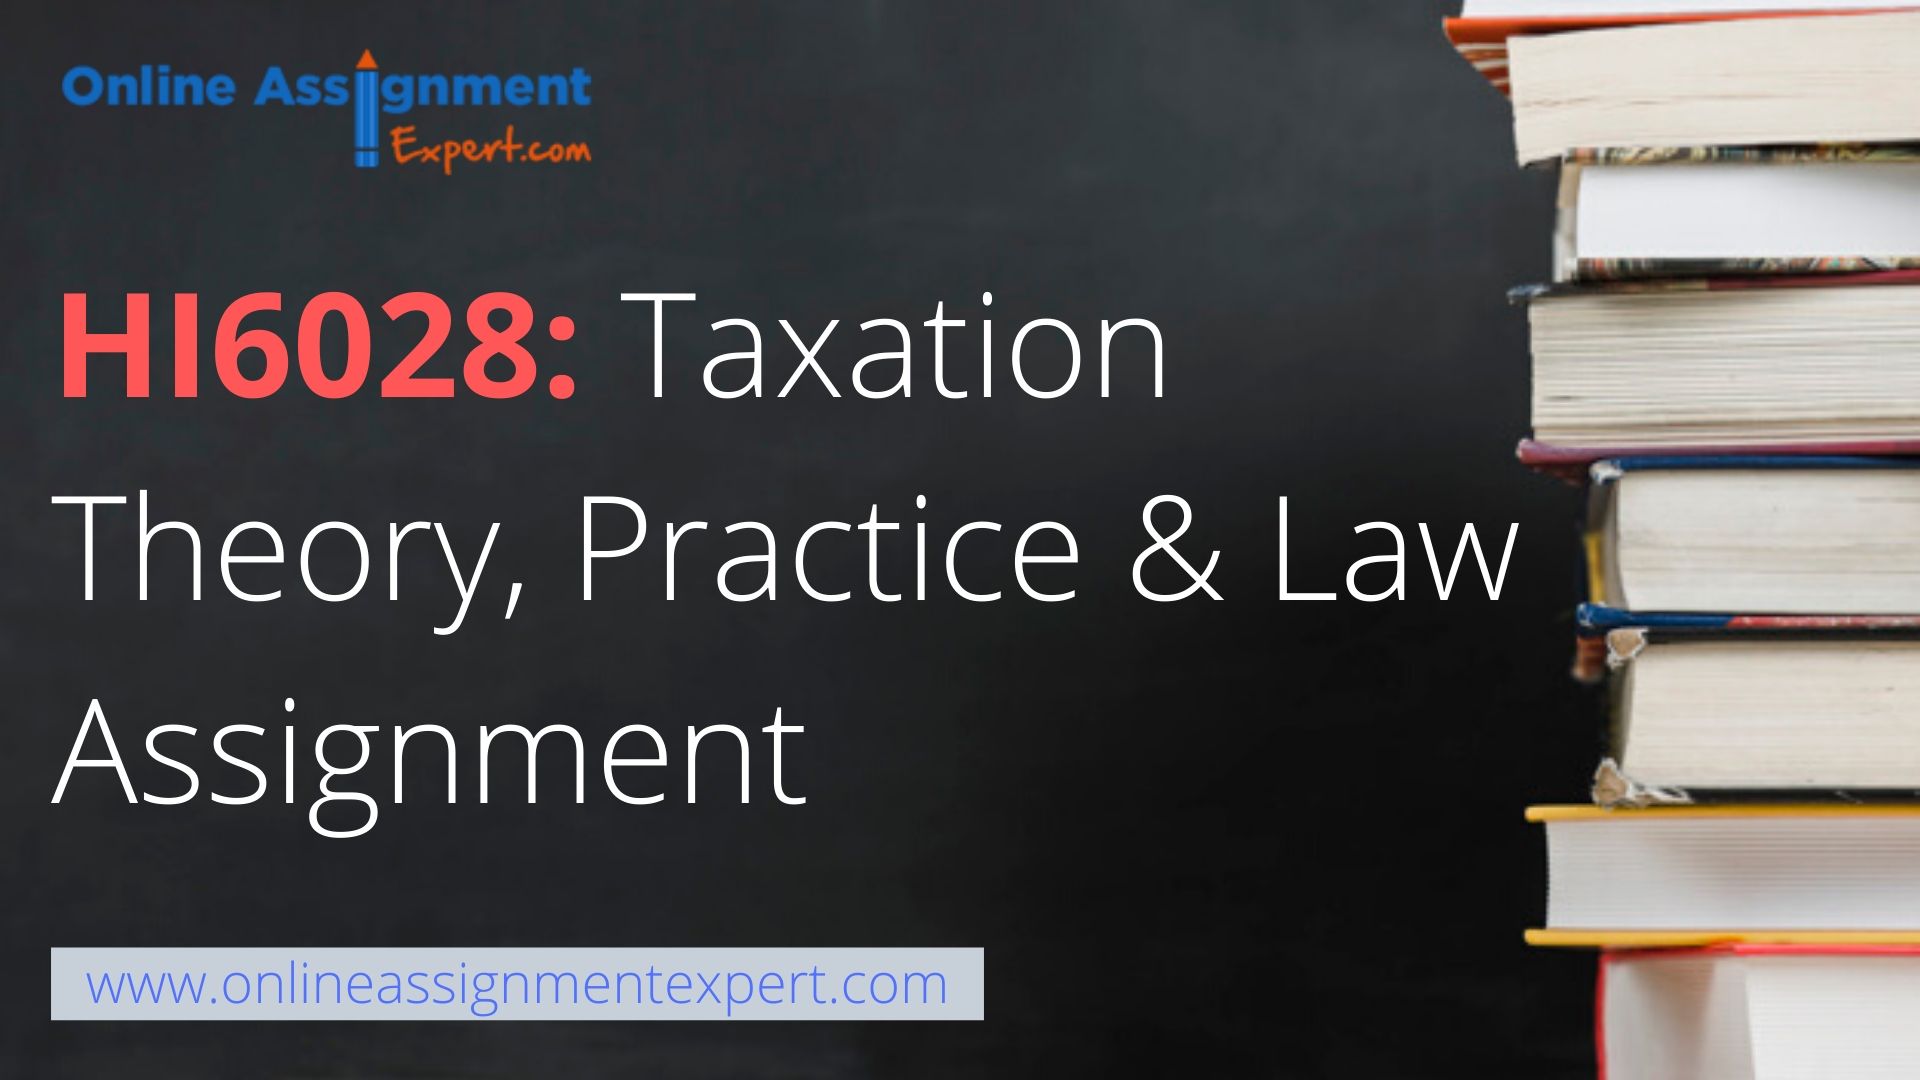 HI6028: Taxation Theory, Practice & Law Assignment